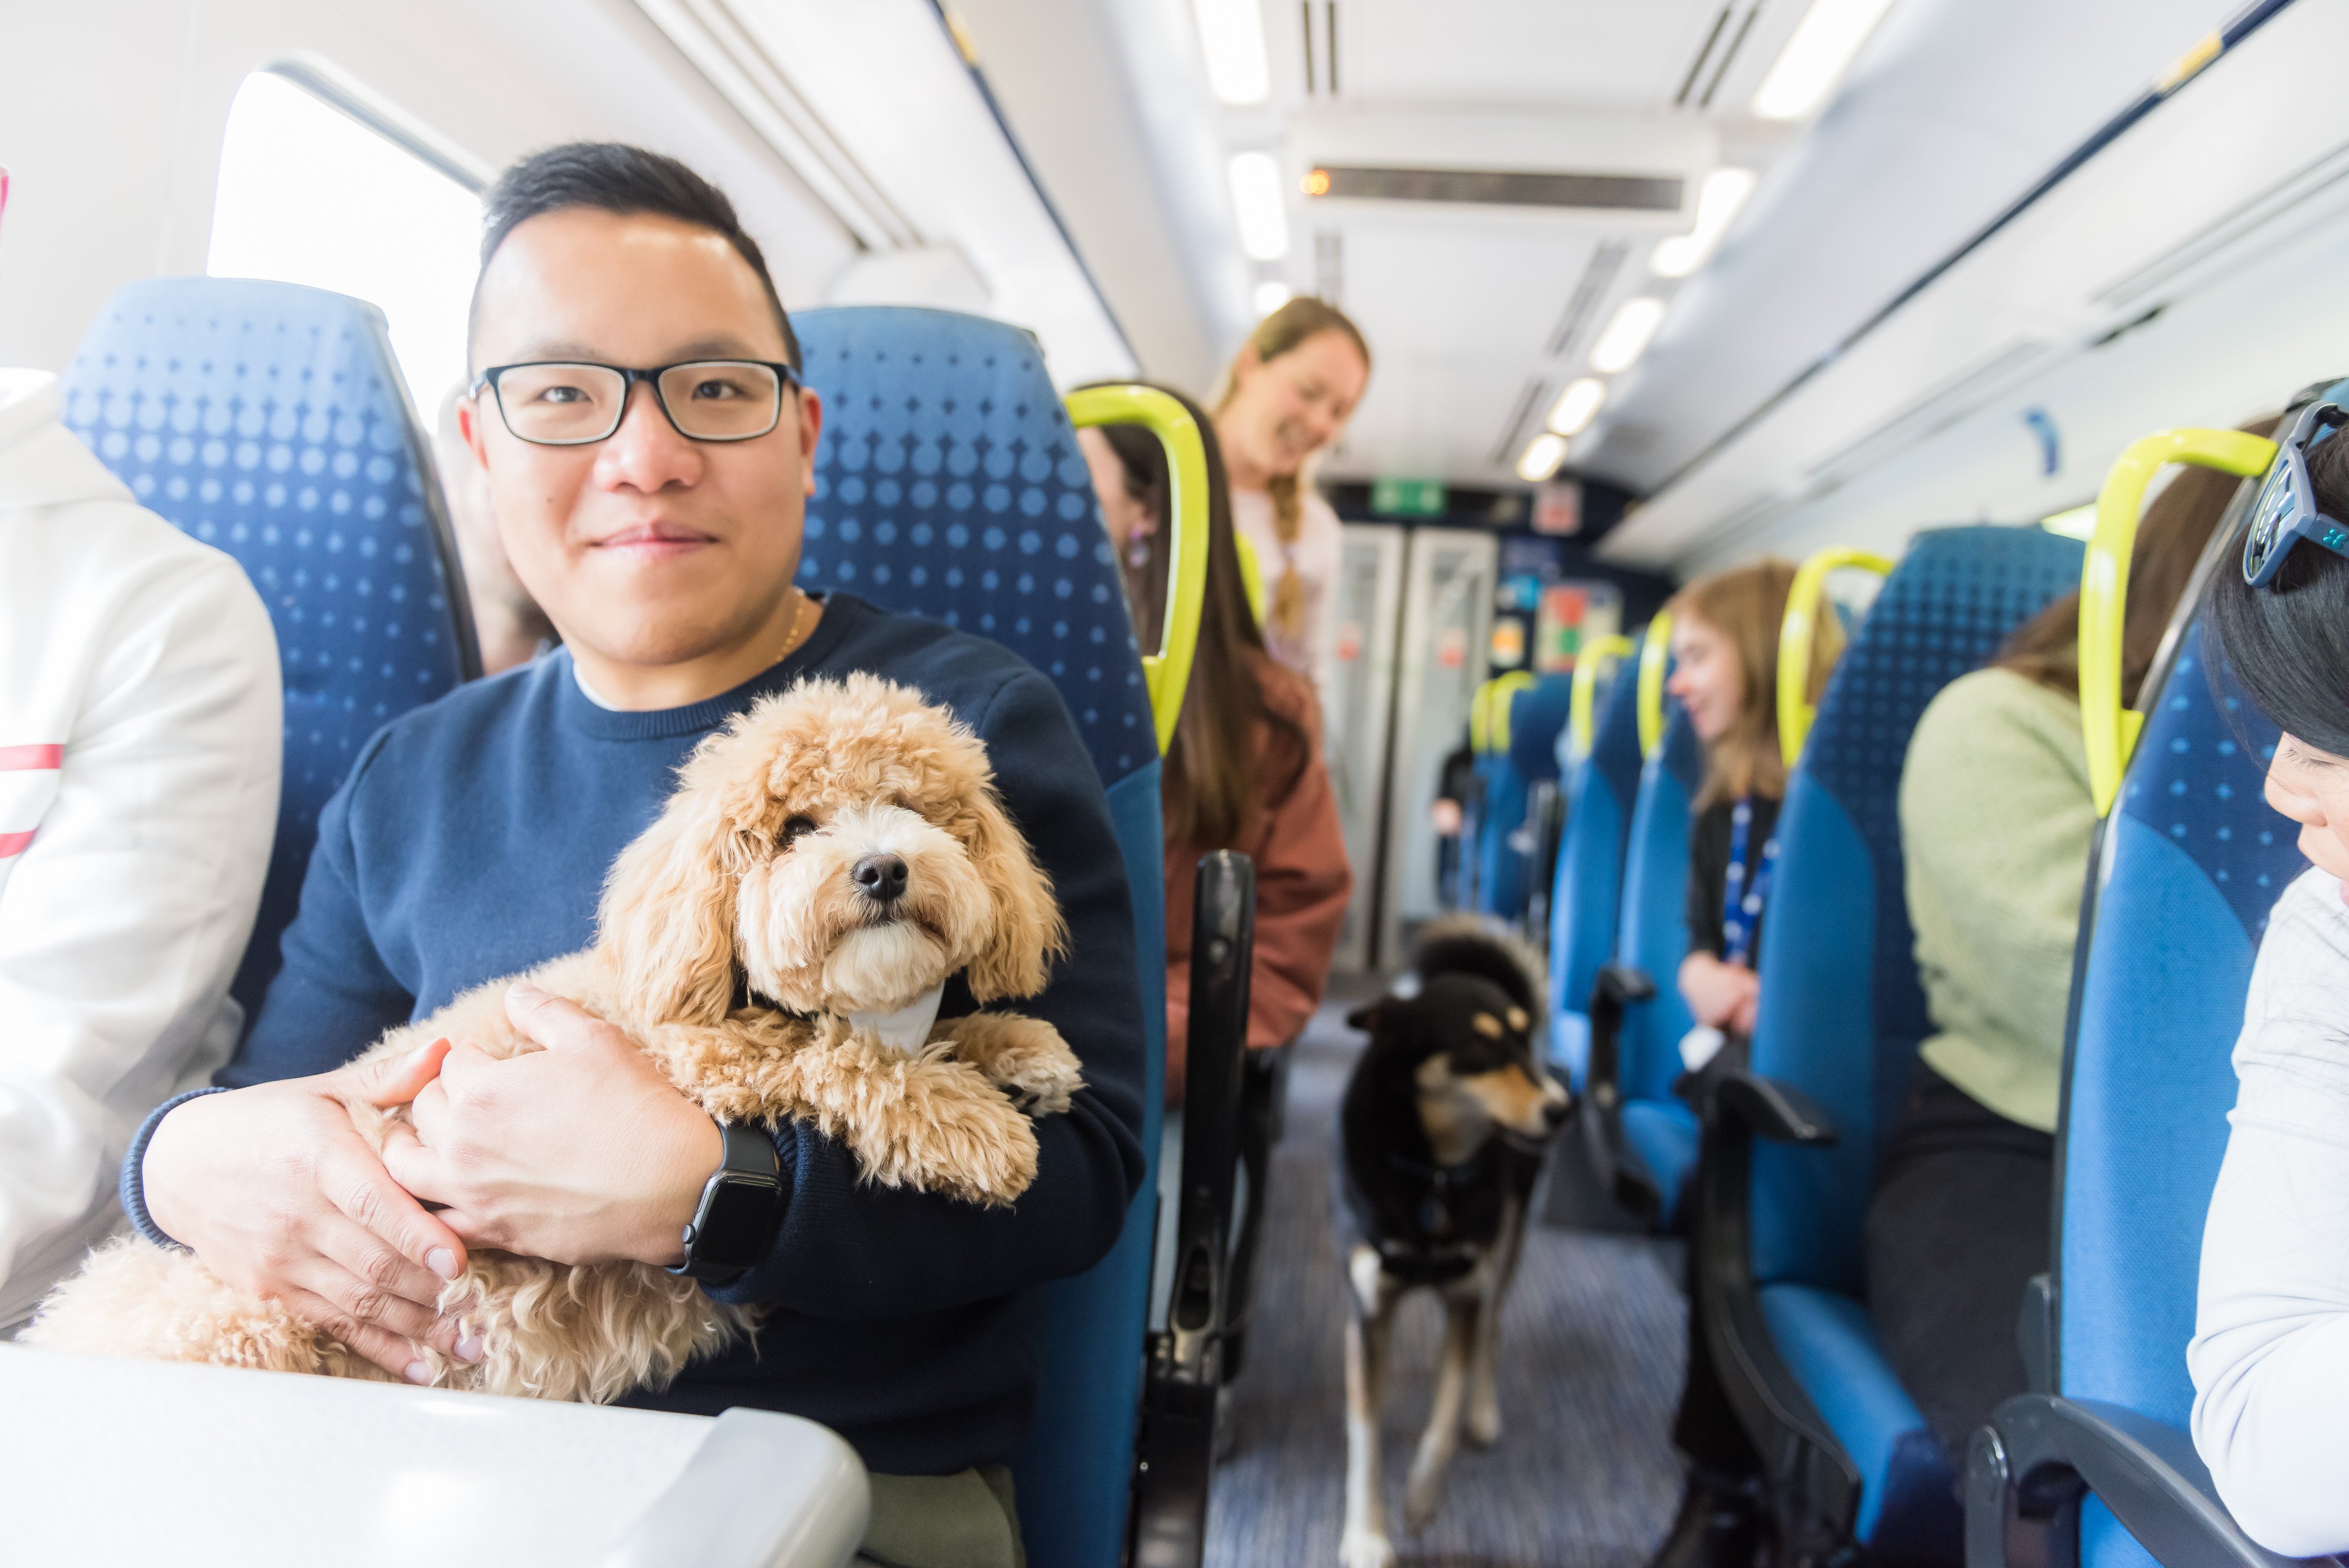 Man sat holding his small dog on a Northern train